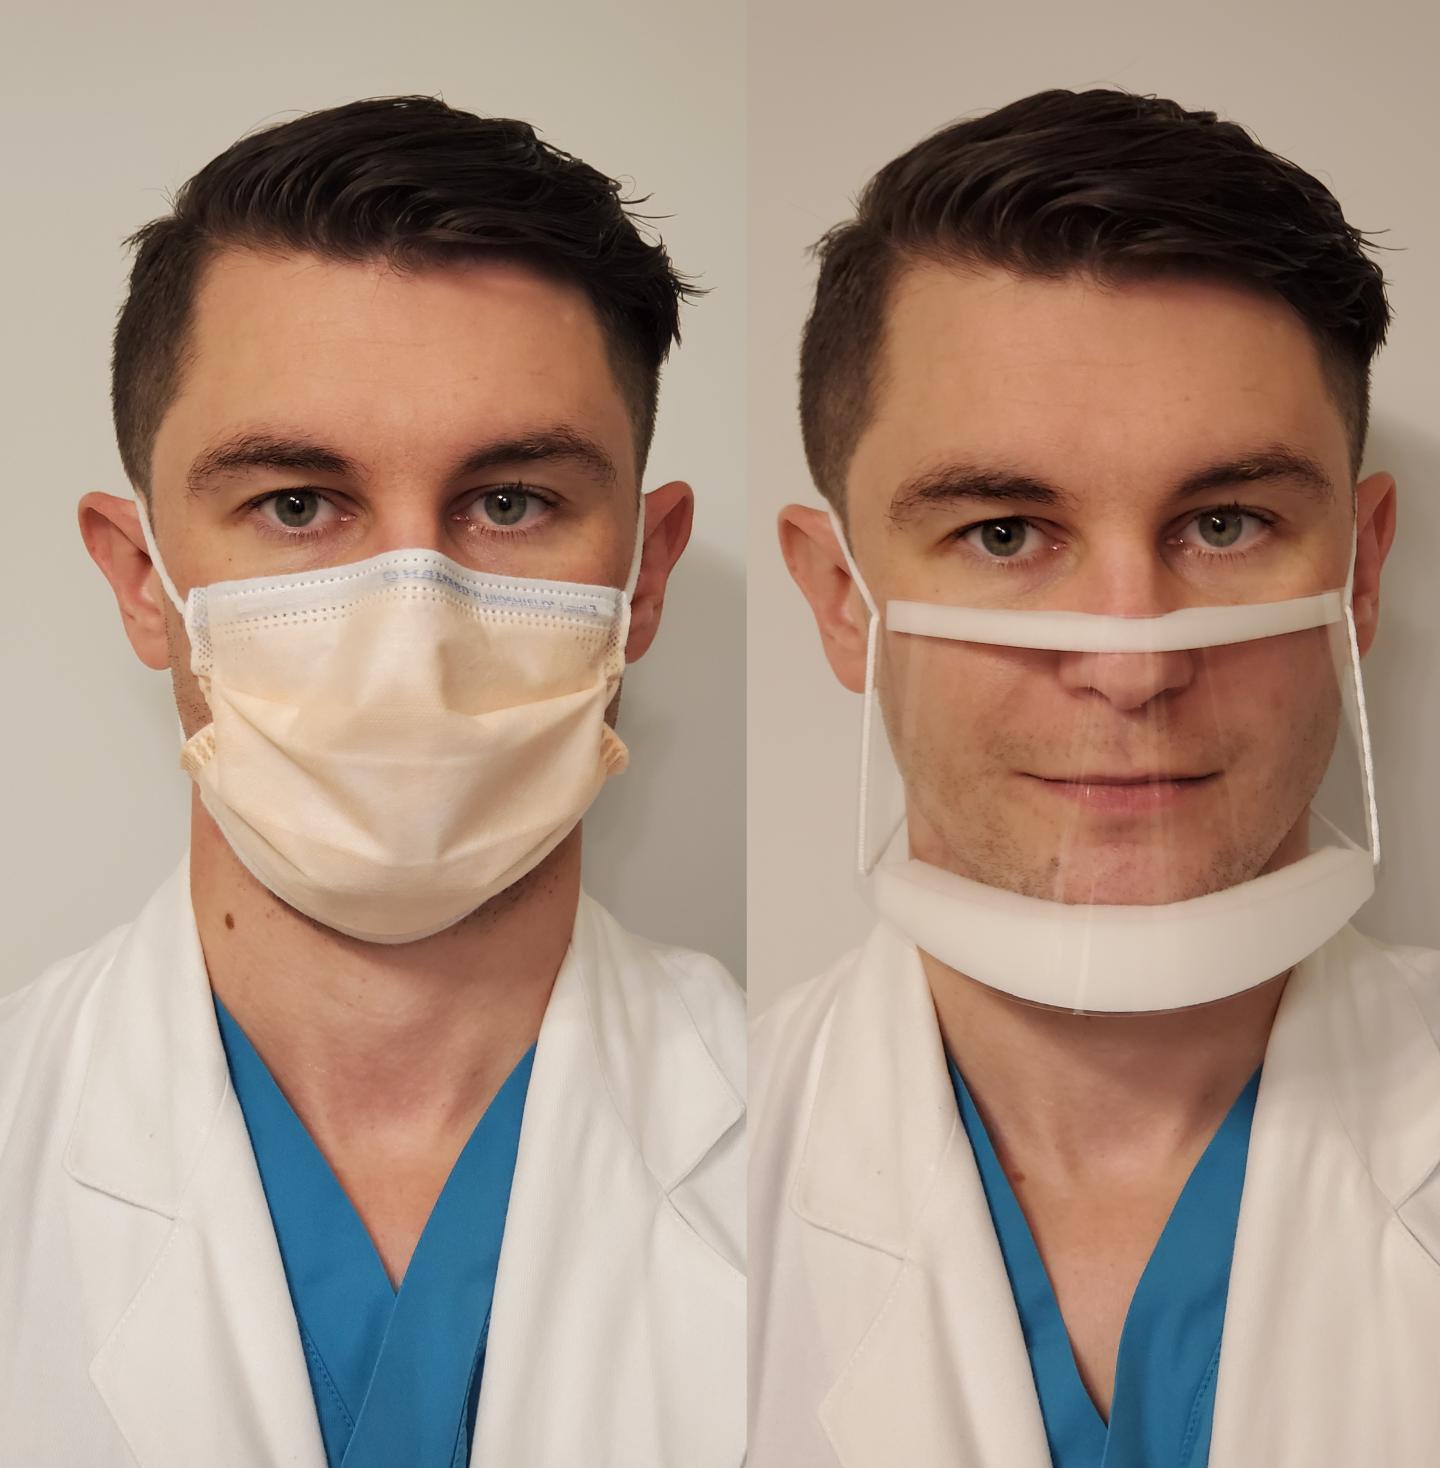 Normal Mask vs. Clear Mask, demonstrated by Ian Kratzke, MD